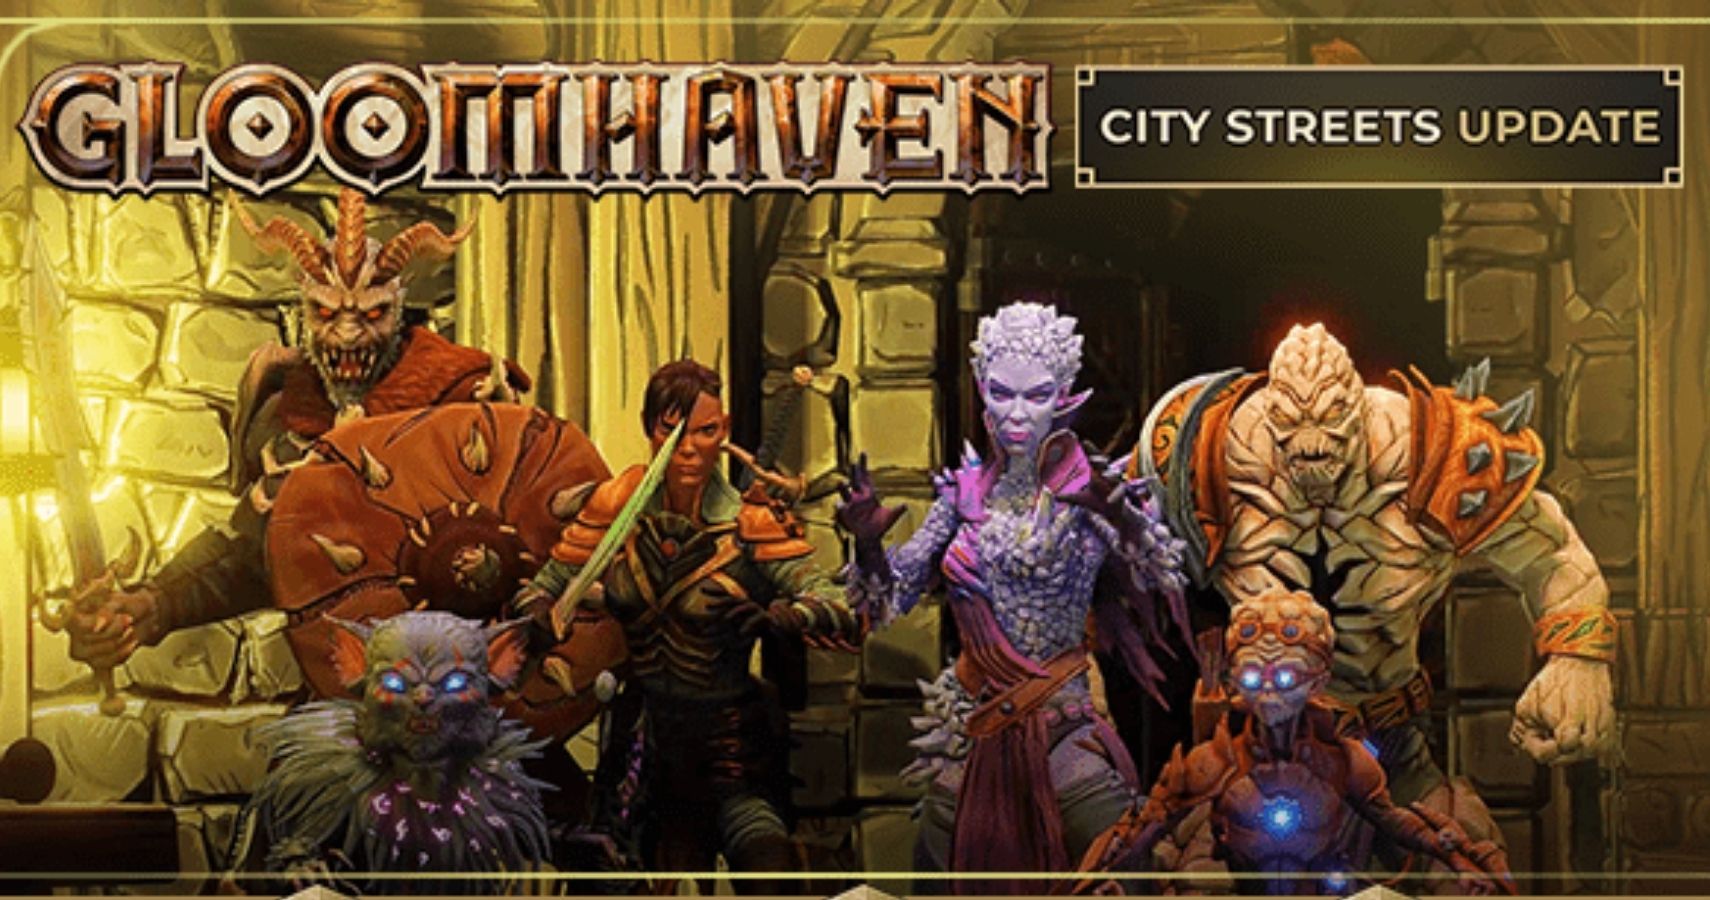 Gloomhaven City Streets Merc Update feature image